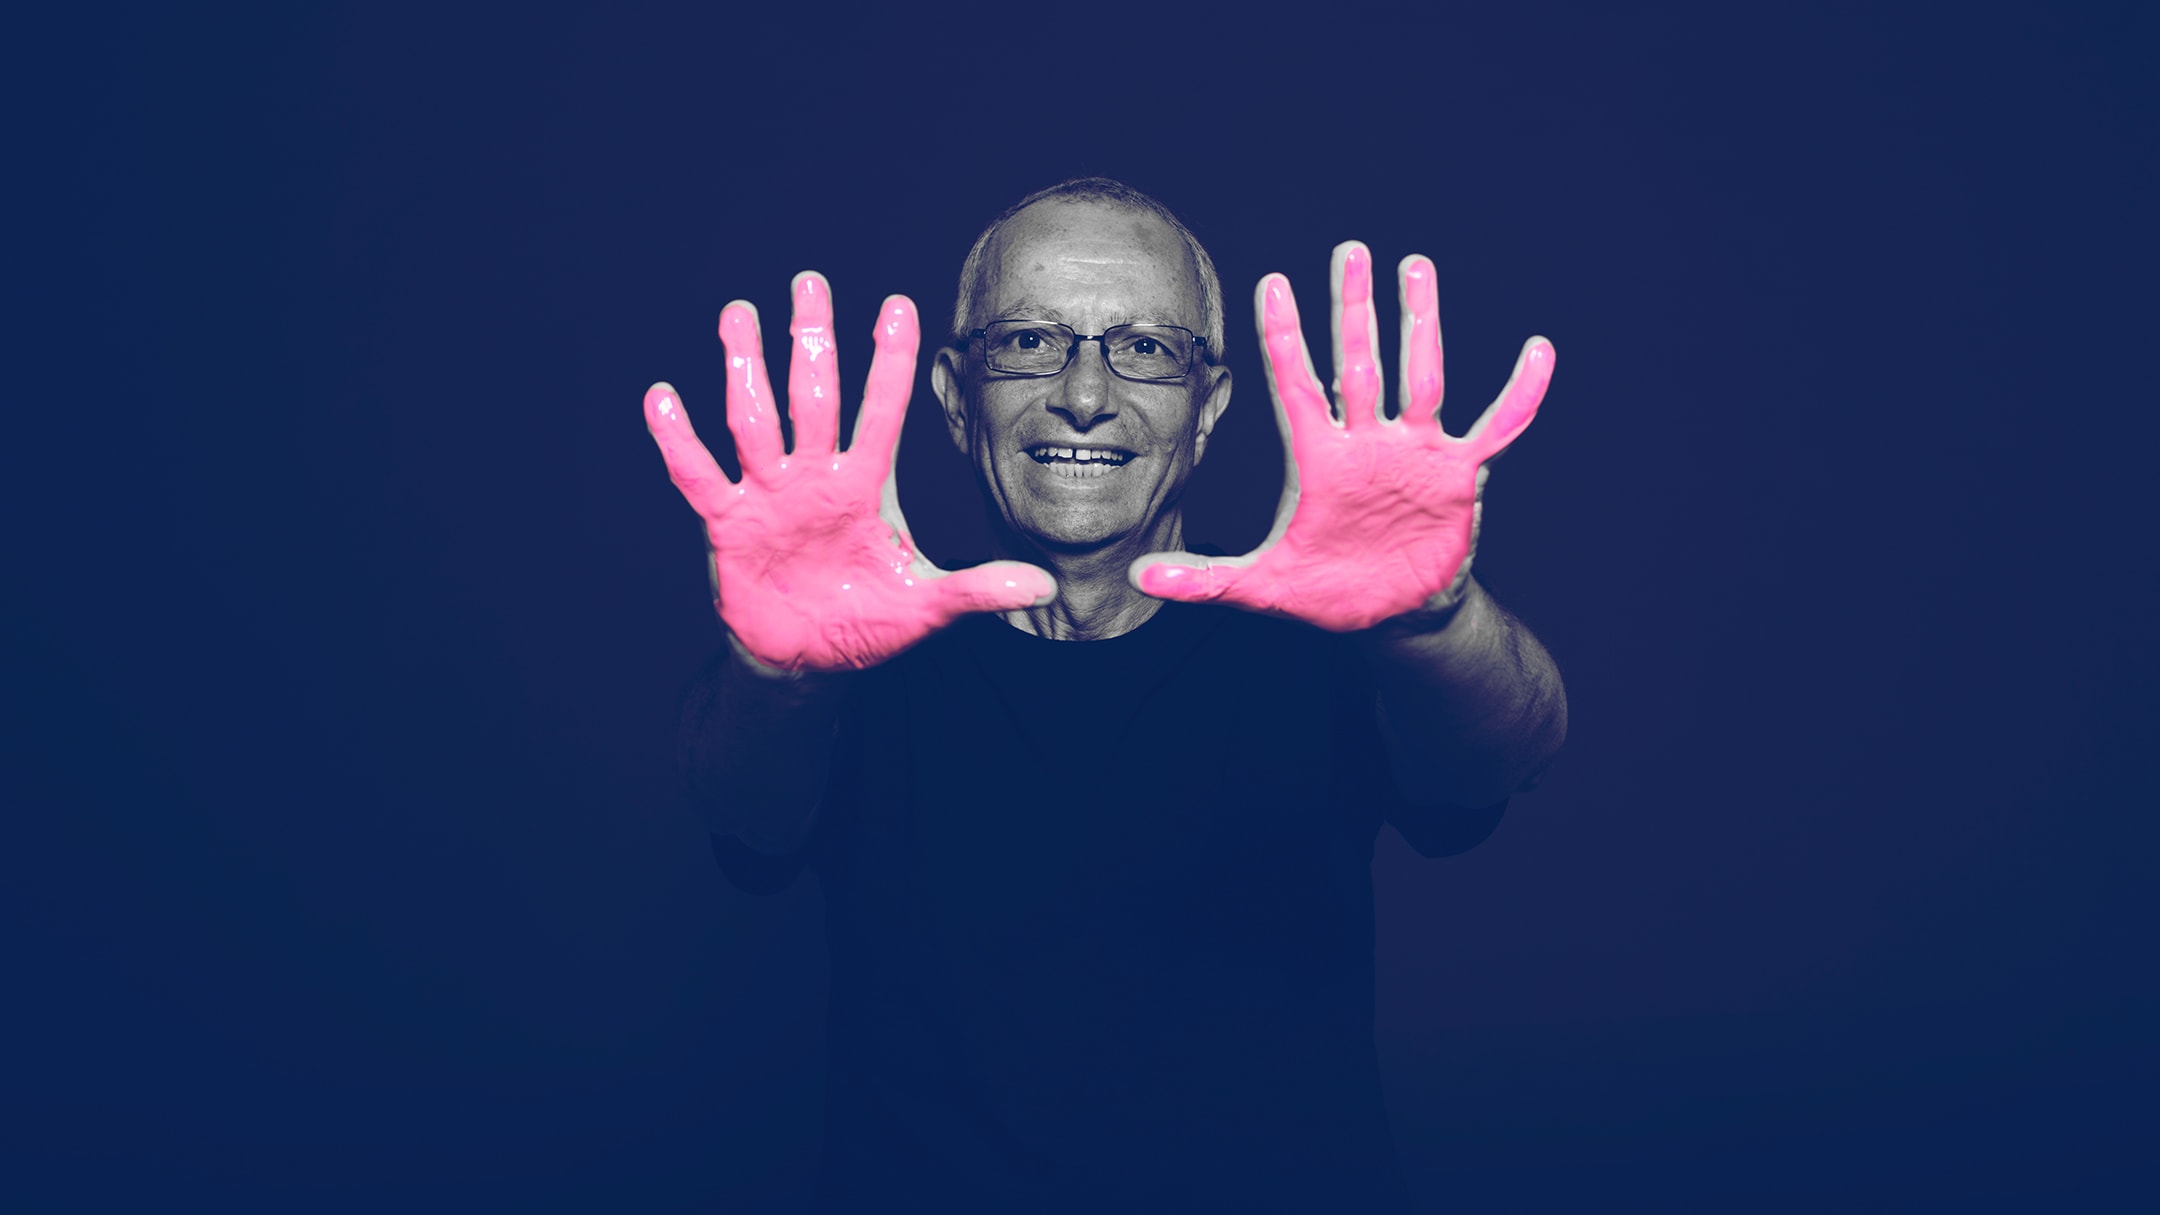 BayCare survivor posing for the in our hands campaign with pink paint on his hands